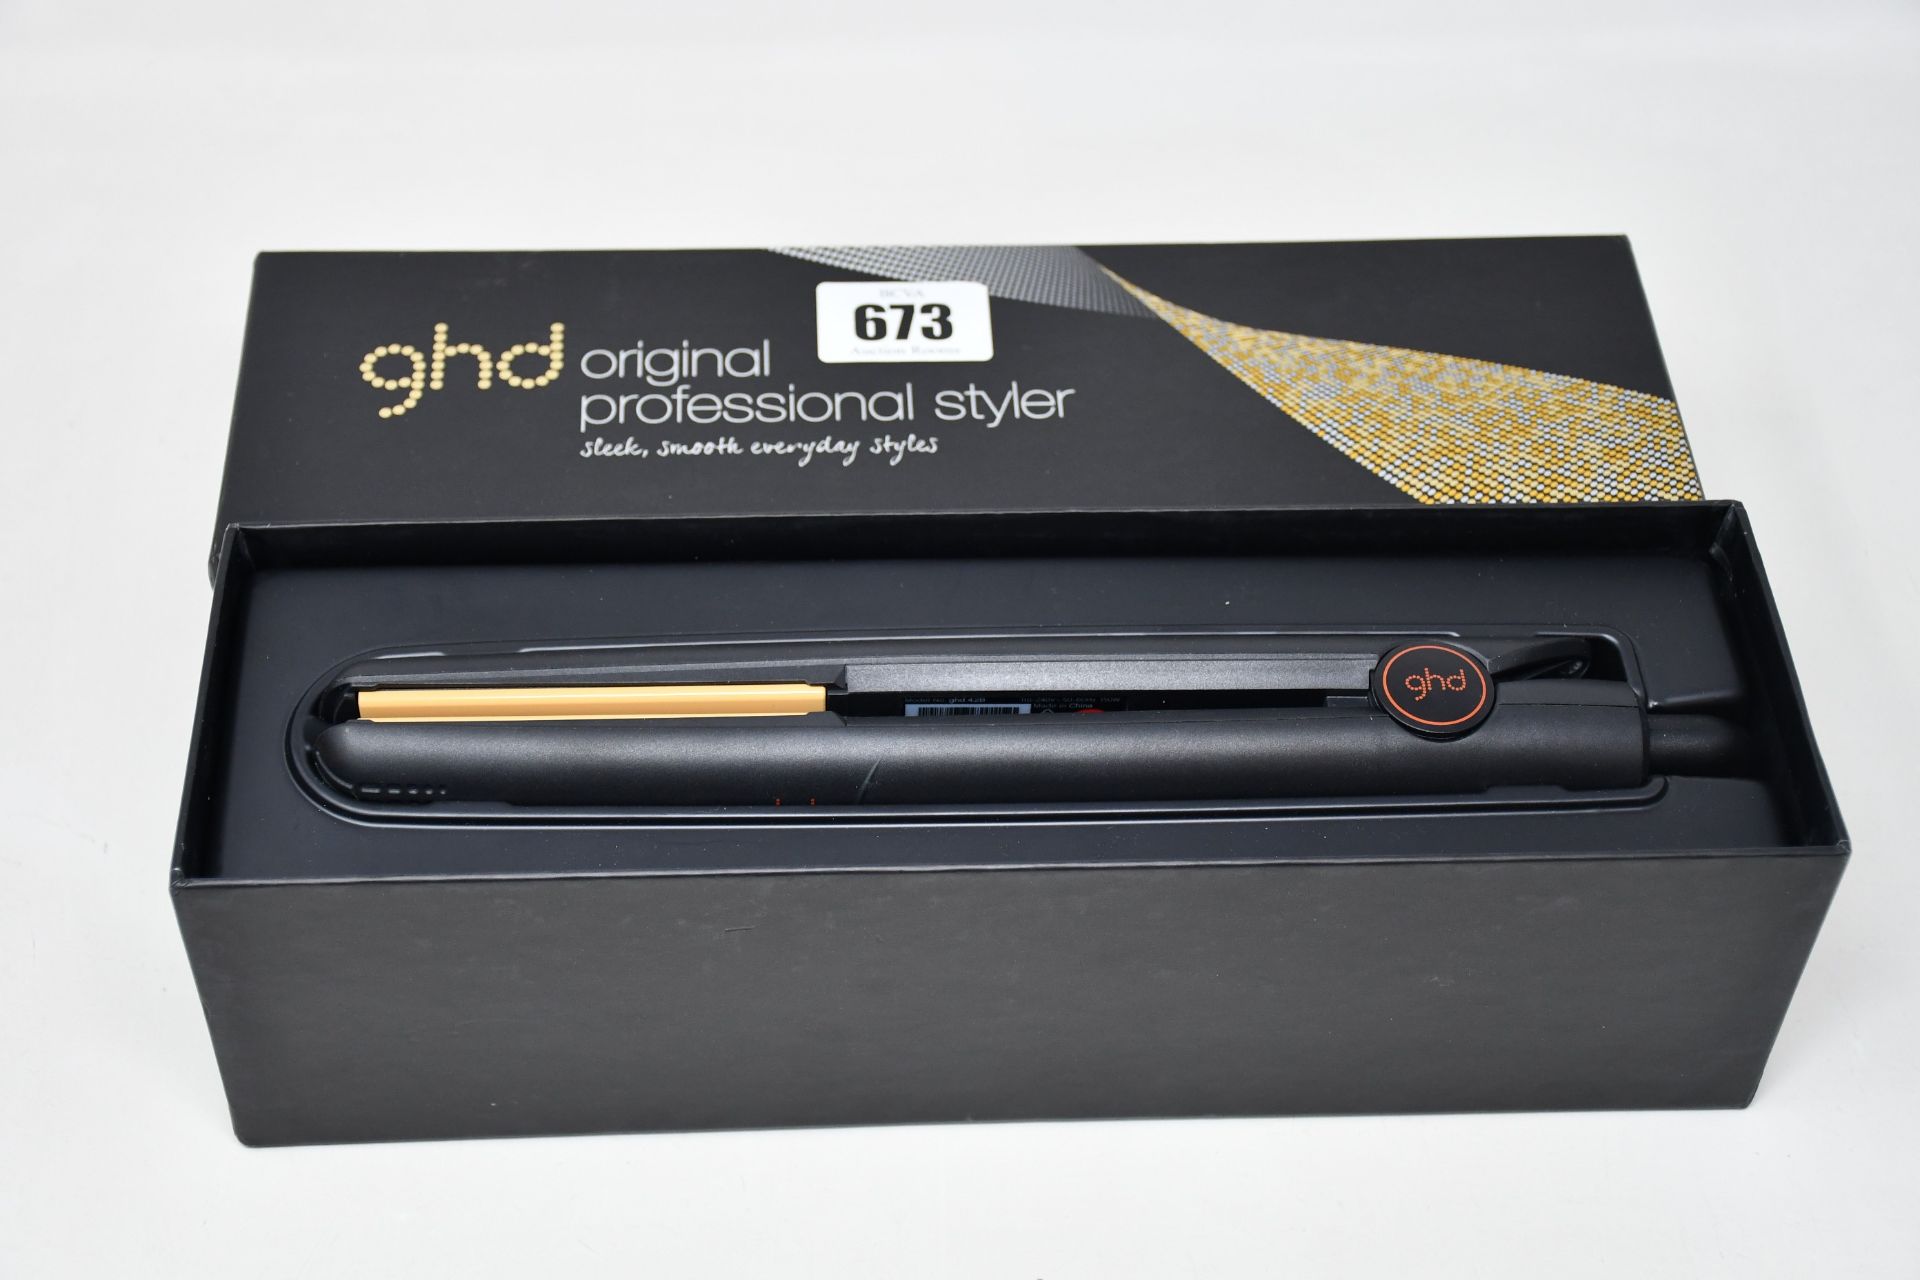 A pair of boxed GHD Original Professional Styler hair straighteners.